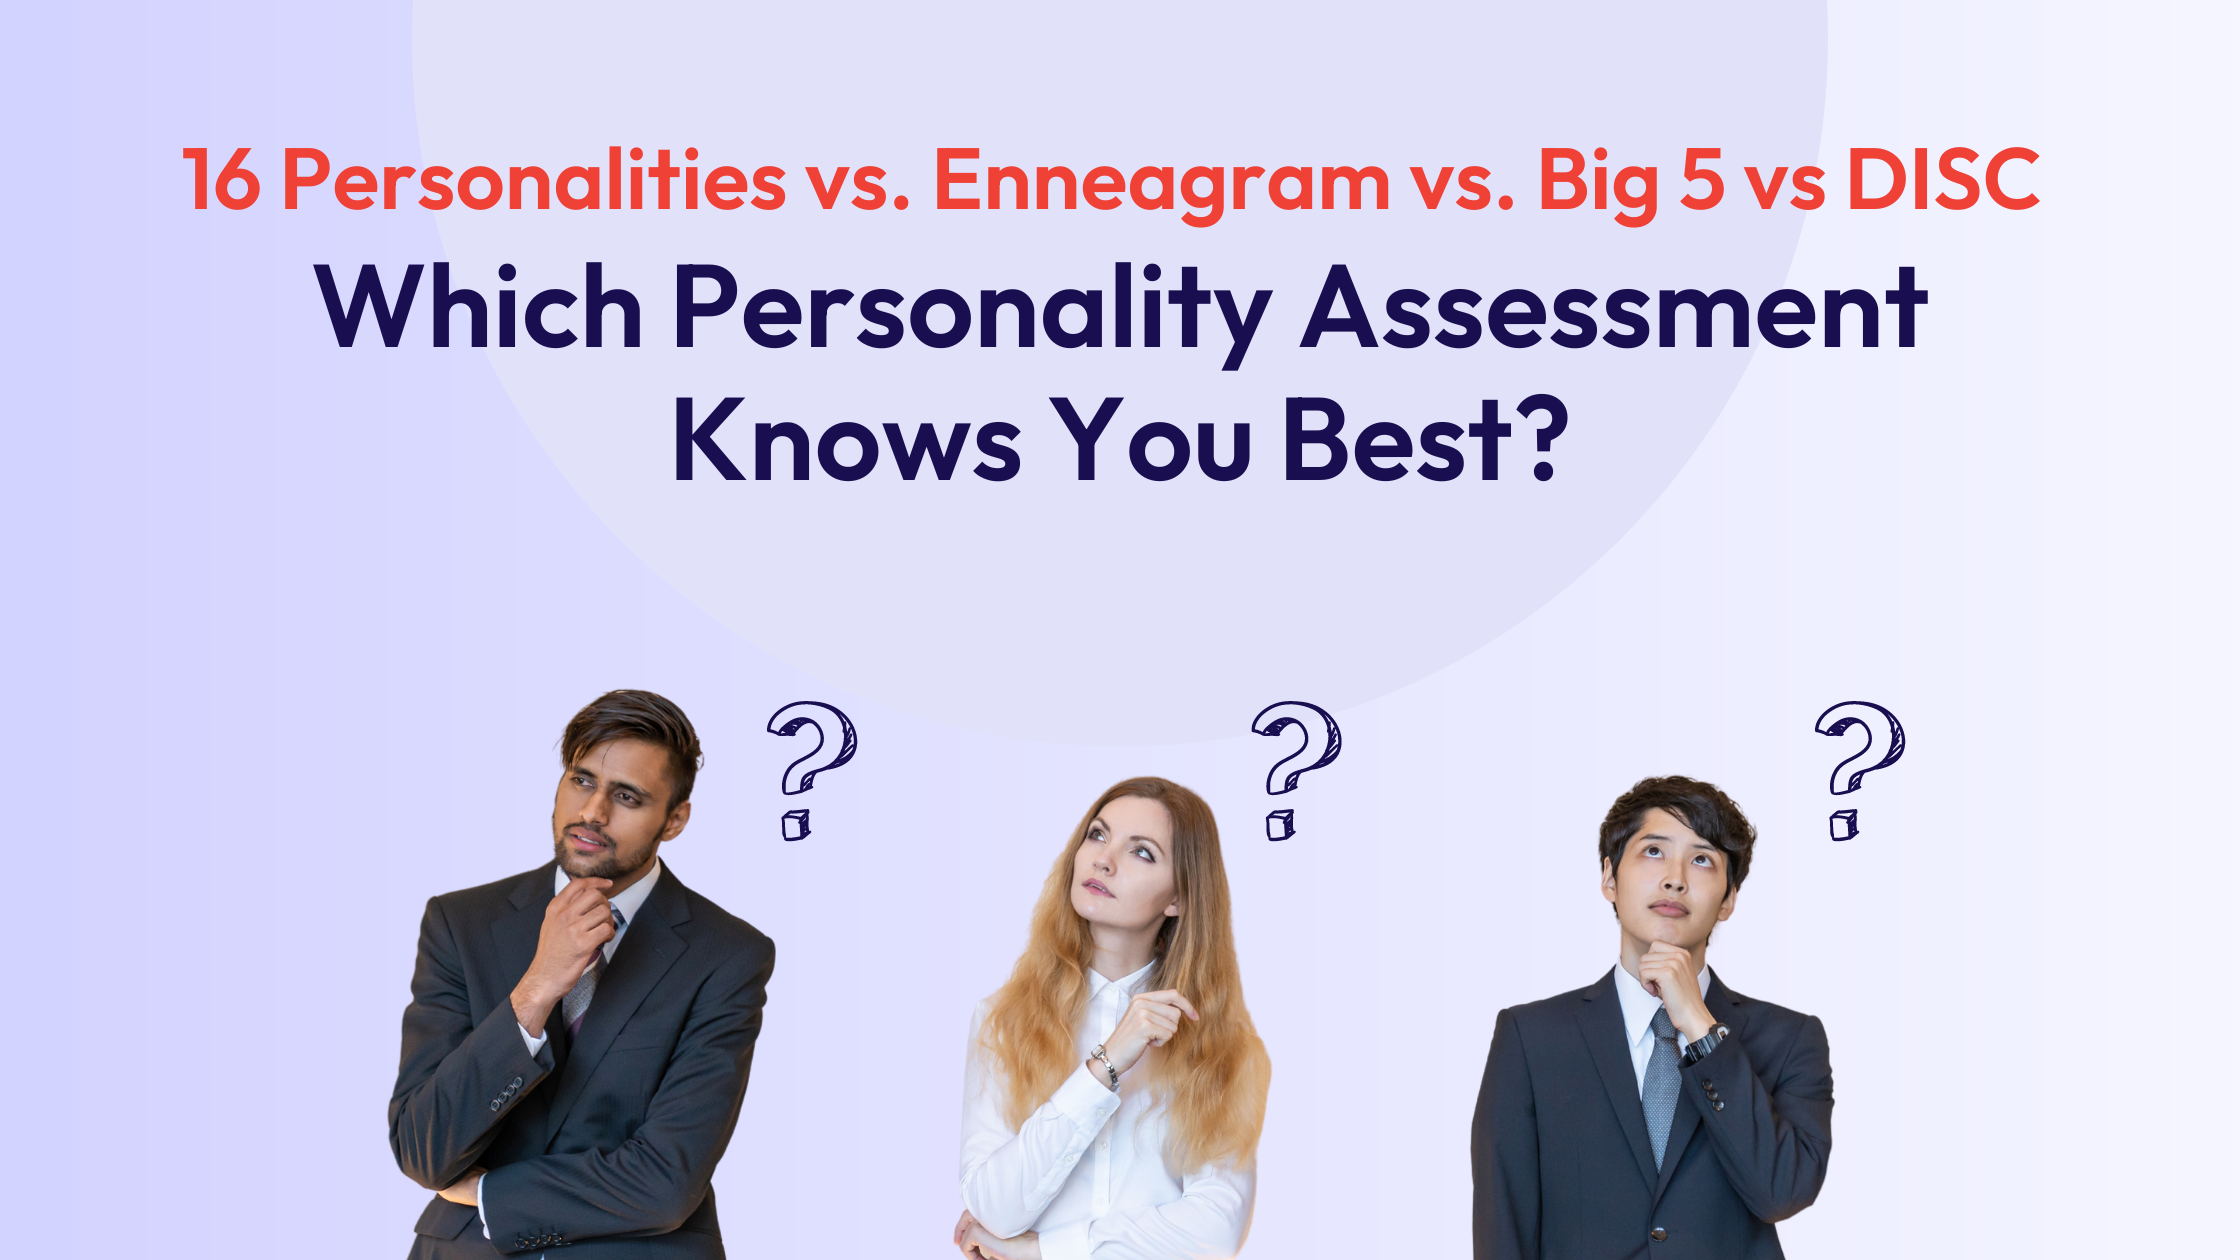 16 Personalities Vs. Enneagram Vs. DISC Vs. Big 5 Which Personality Assessment Knows You Best 